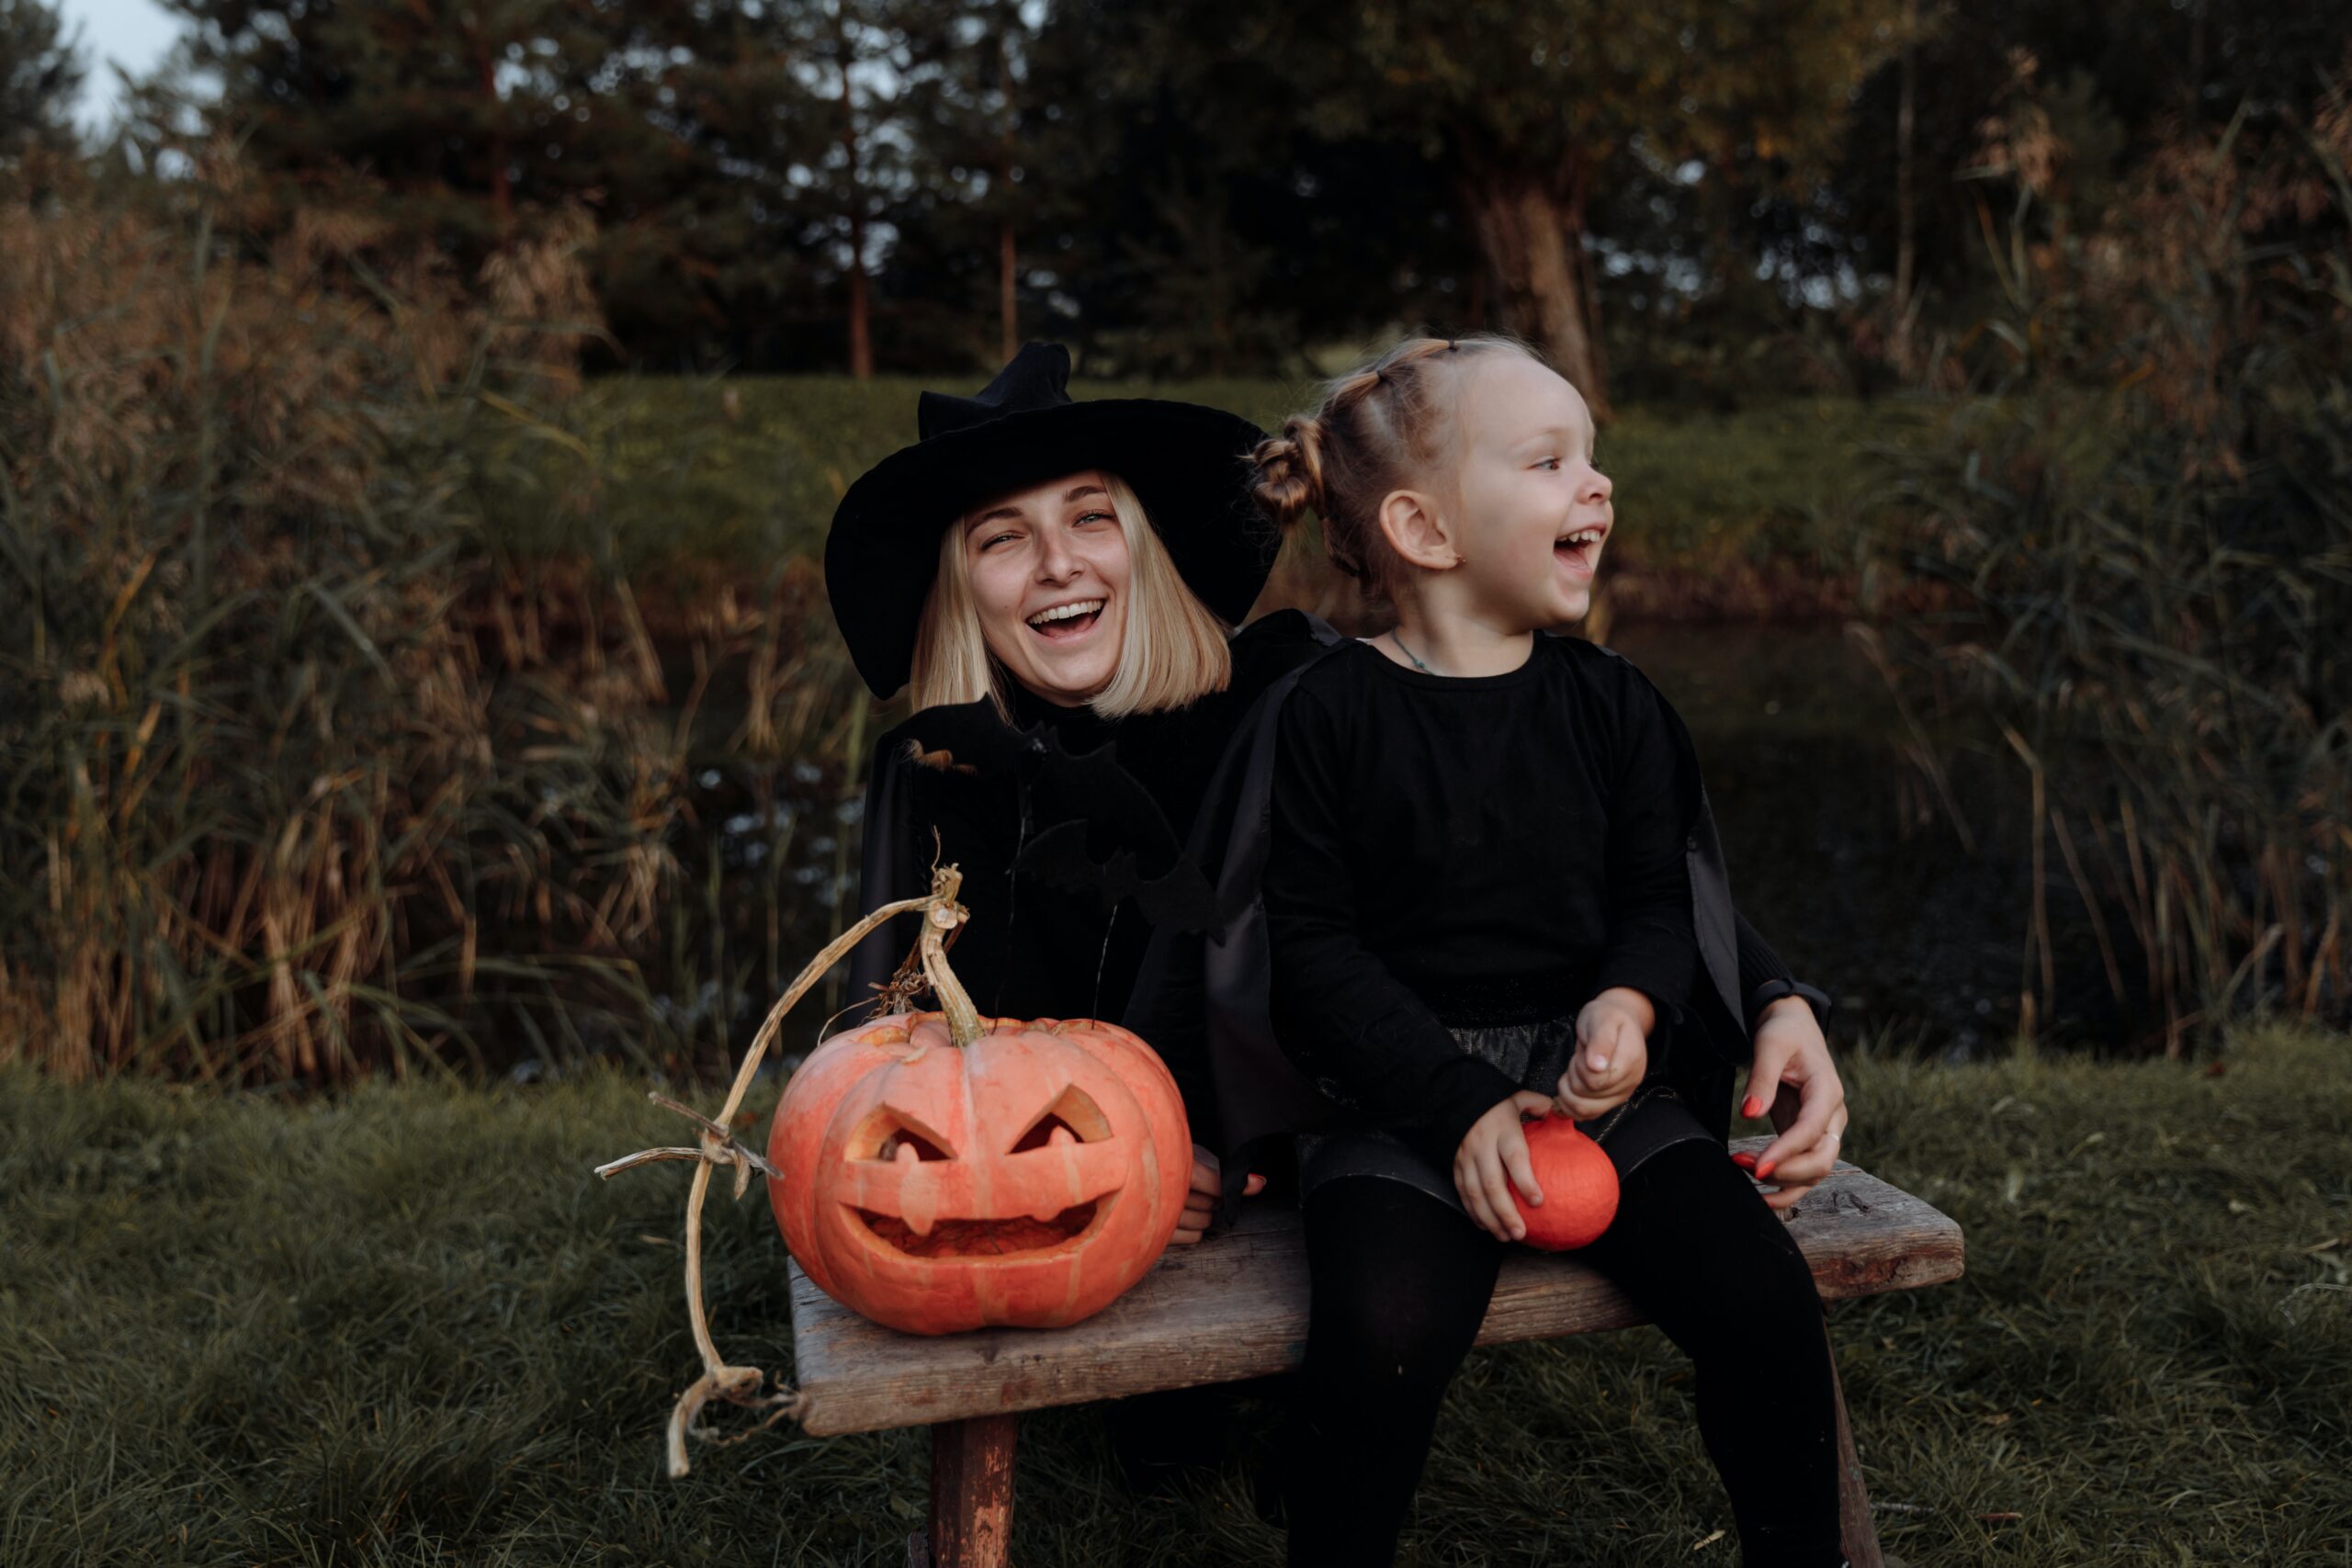 A joyful scene of a young woman and a little girl in black Halloween costumes sitting on a bench outdoors in New Jersey with a carved pumpkin, both laughing heartily.